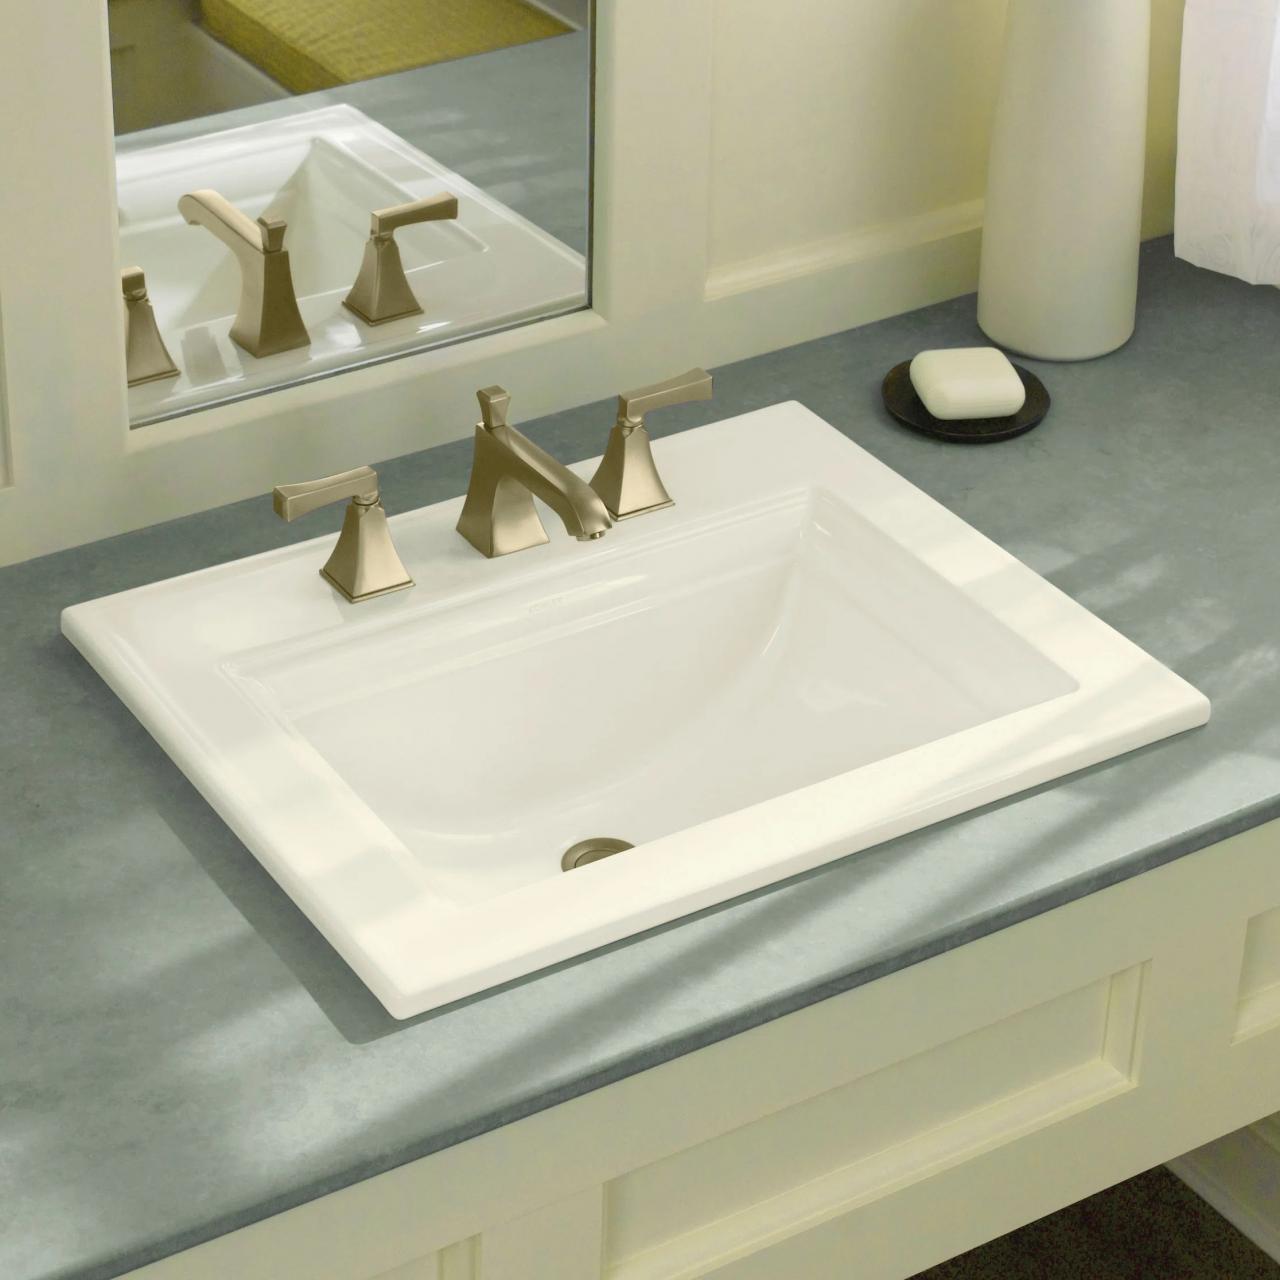 23 Fancy Drop In Bathroom Sinks Home, Decoration, Style and Art Ideas